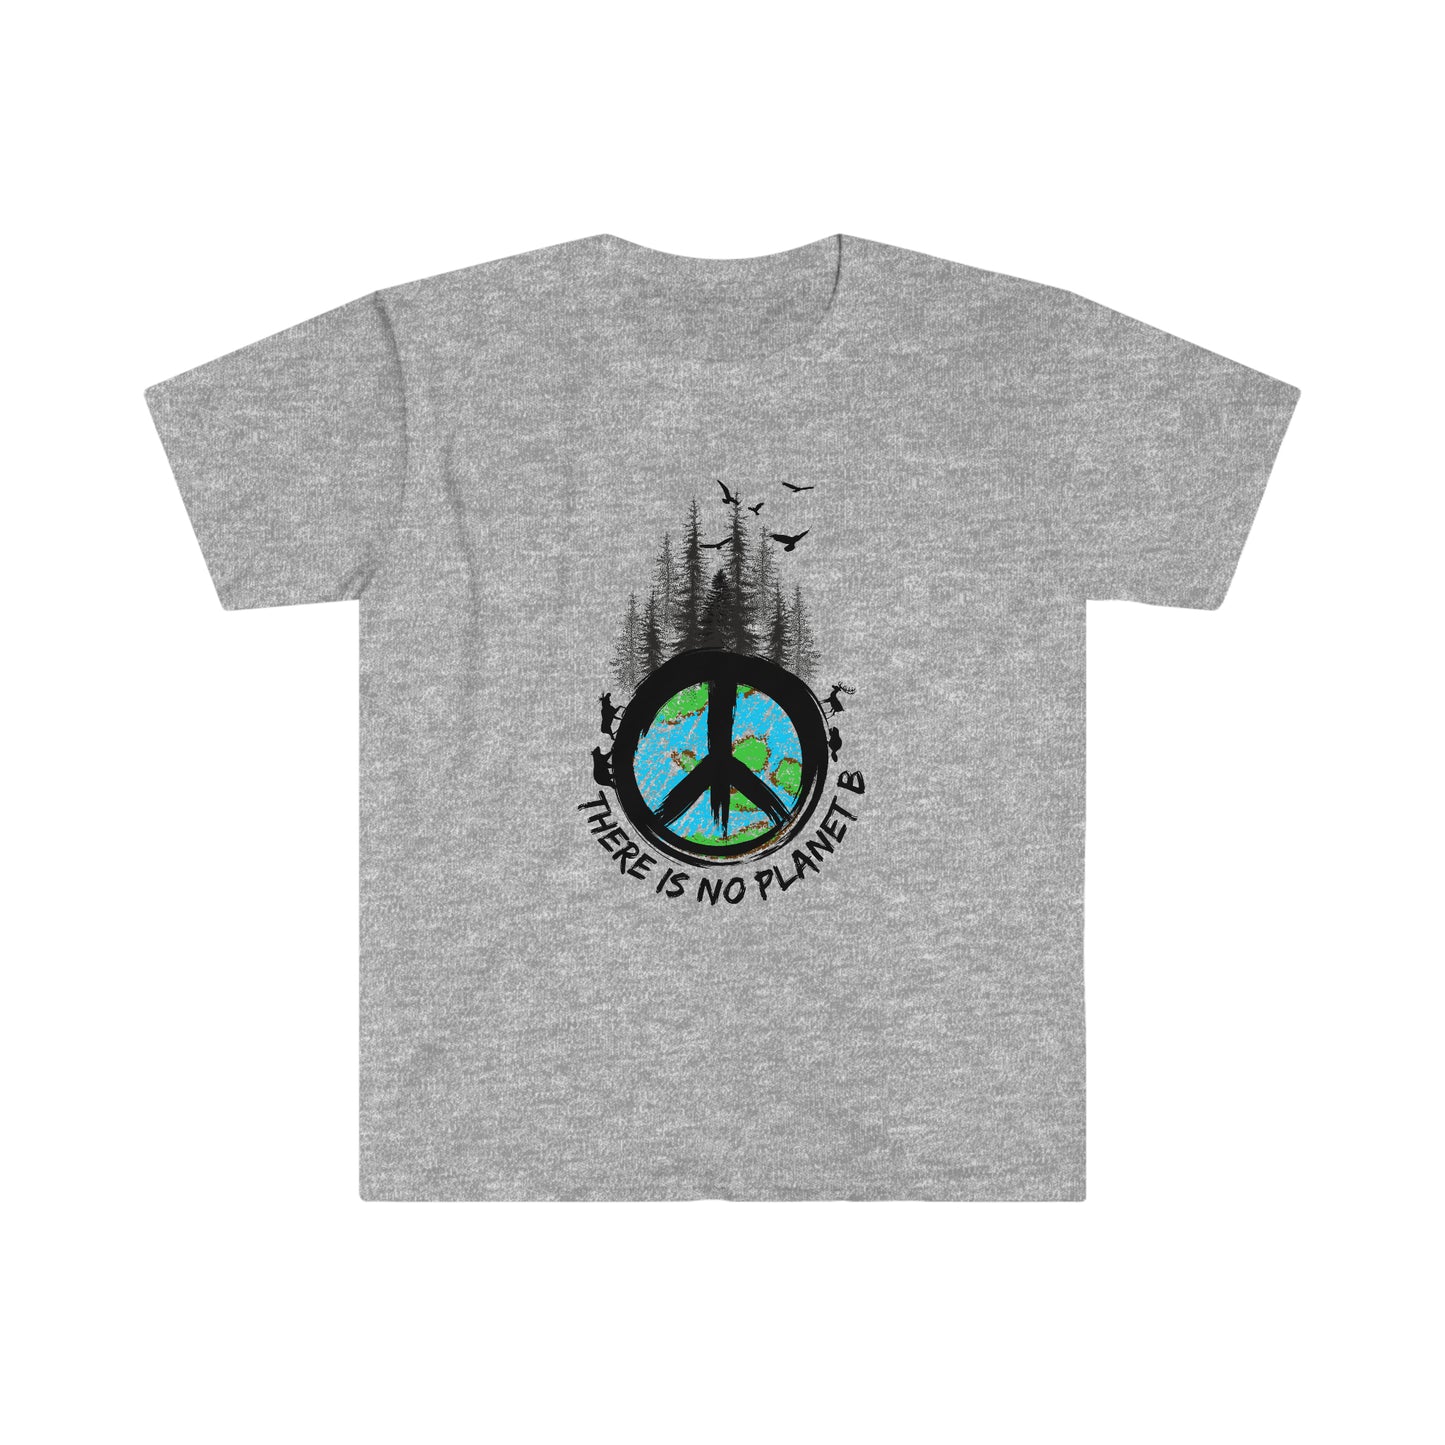 Theres No Planet B - Mother Earth - Urban Camper